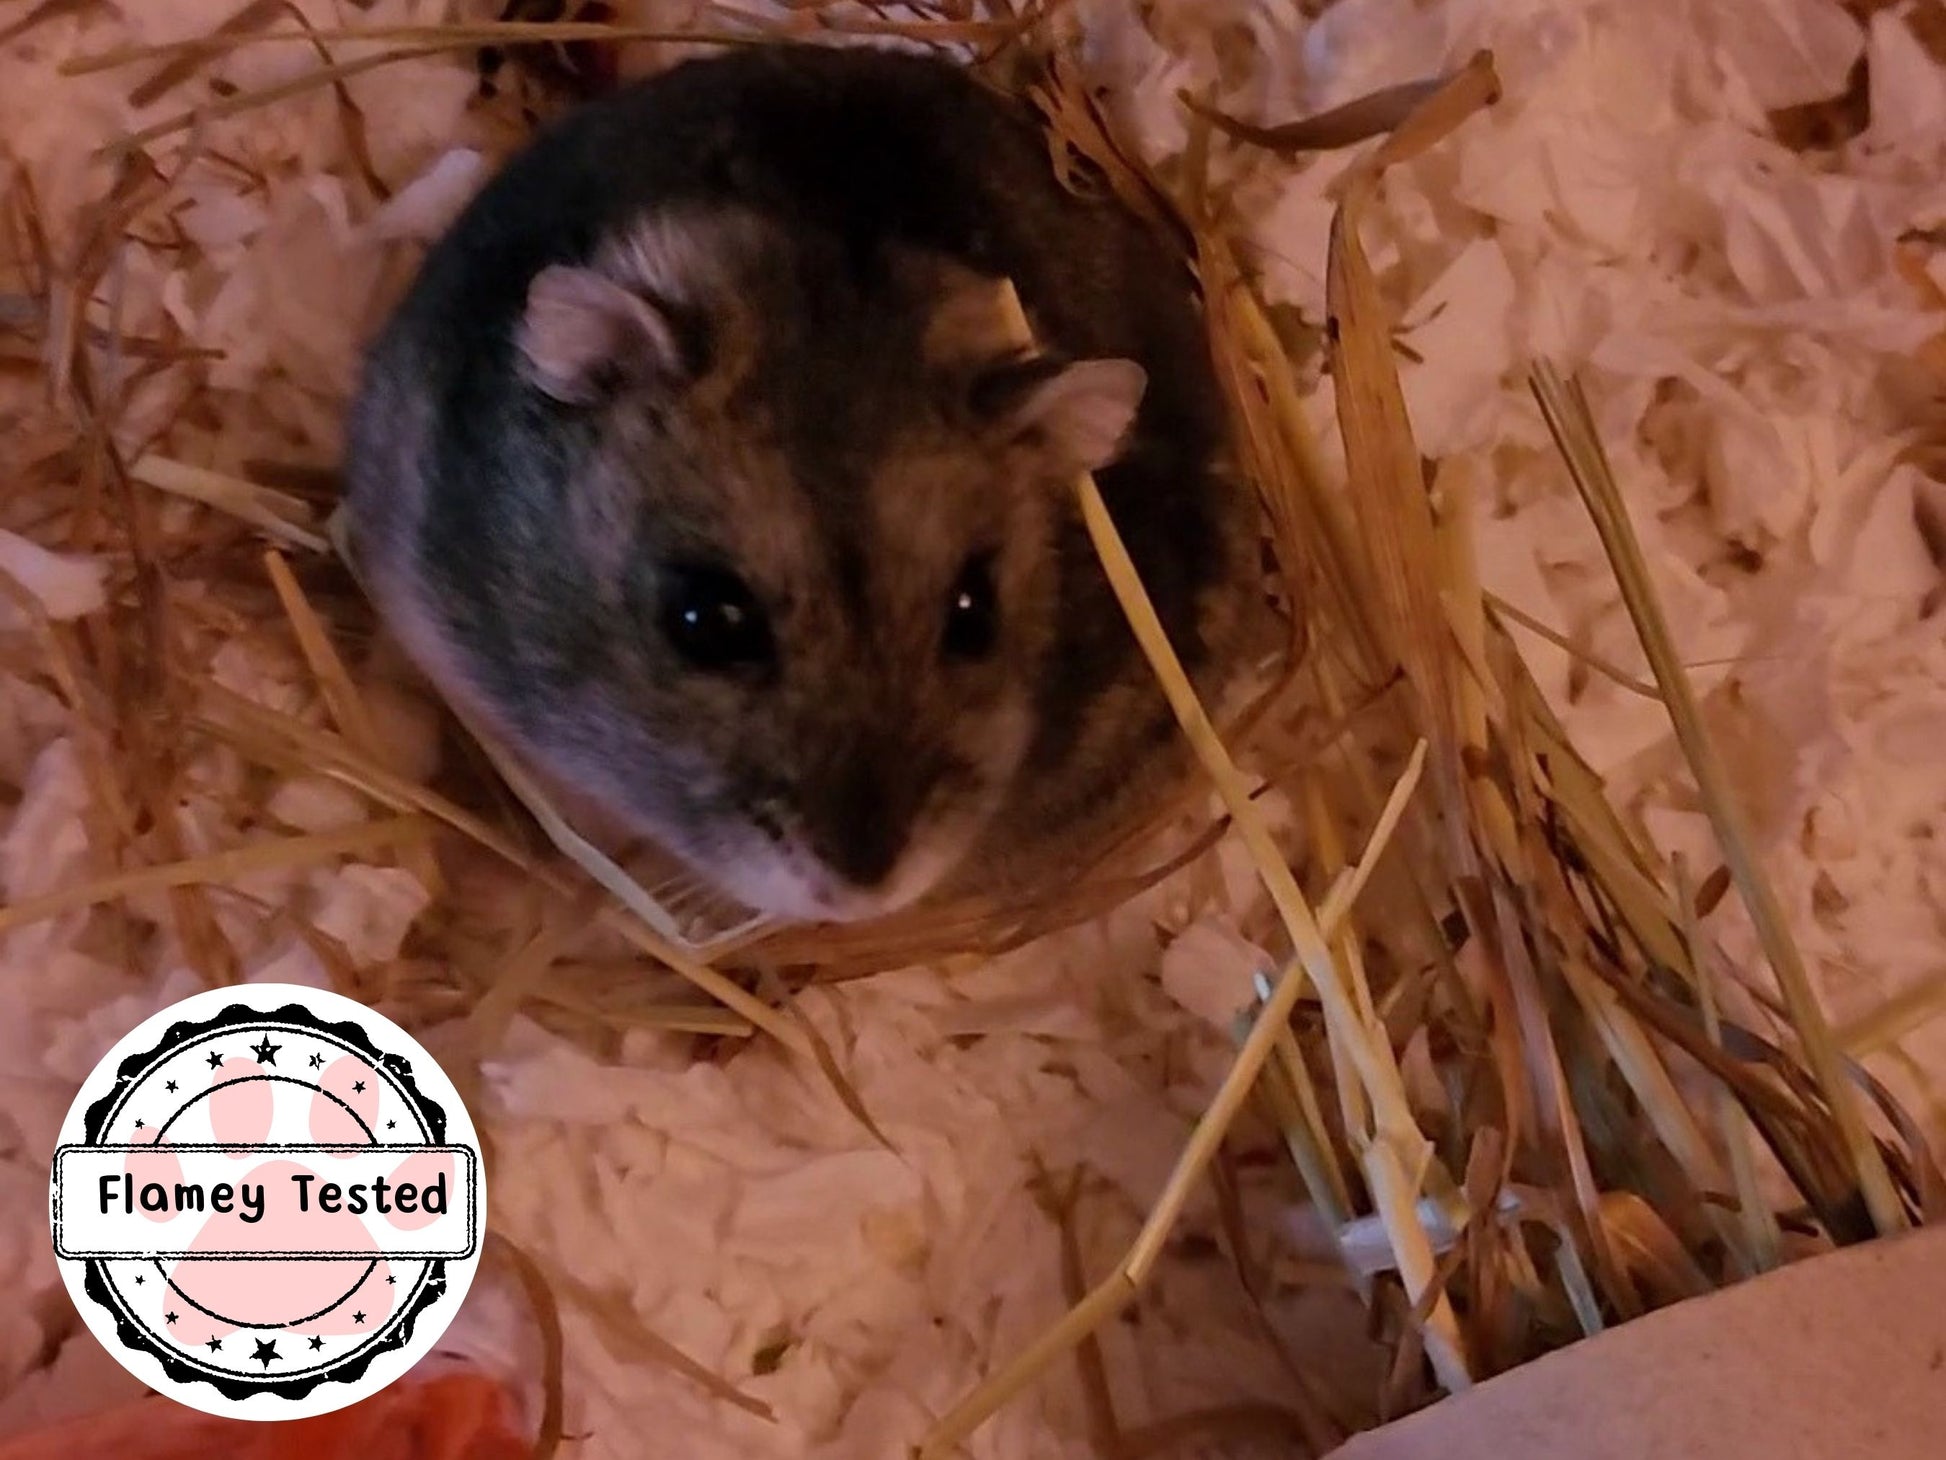 An adorable winter white dwarf hamster called flamey sitting next to a hay stuffed toy and being surrounded by hay he's been chewing on